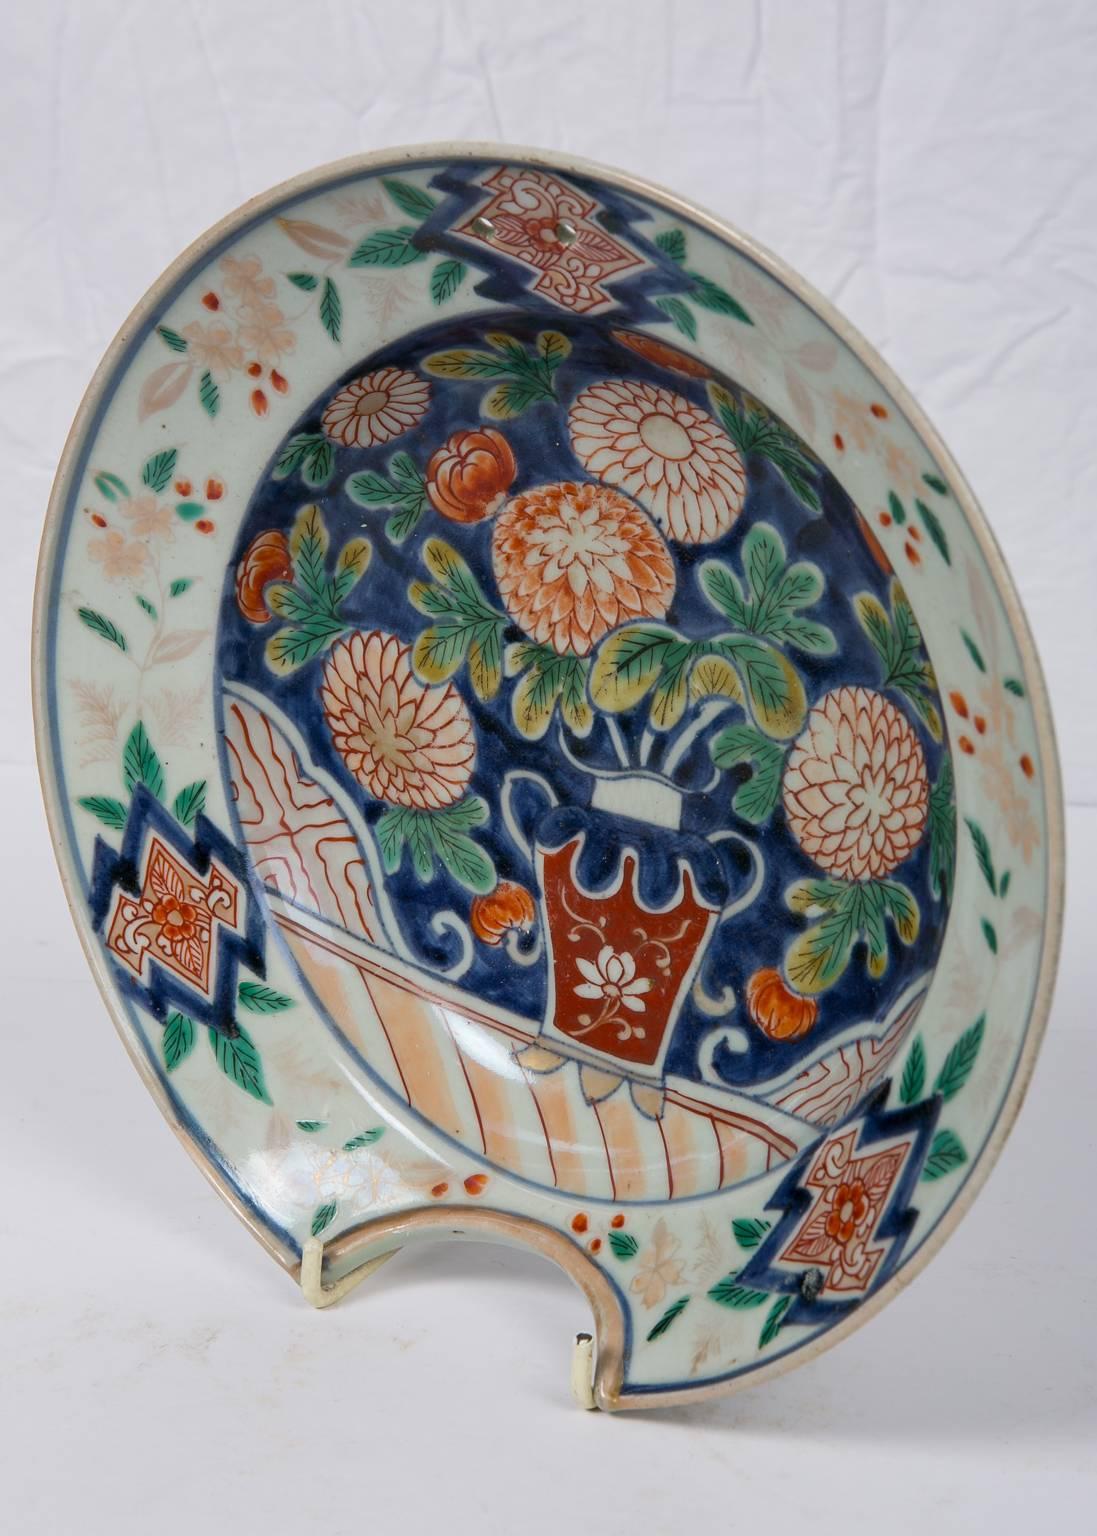 Hand-Painted Chinese Porcelain Bowl Made during the Daoguang Period circa 1820